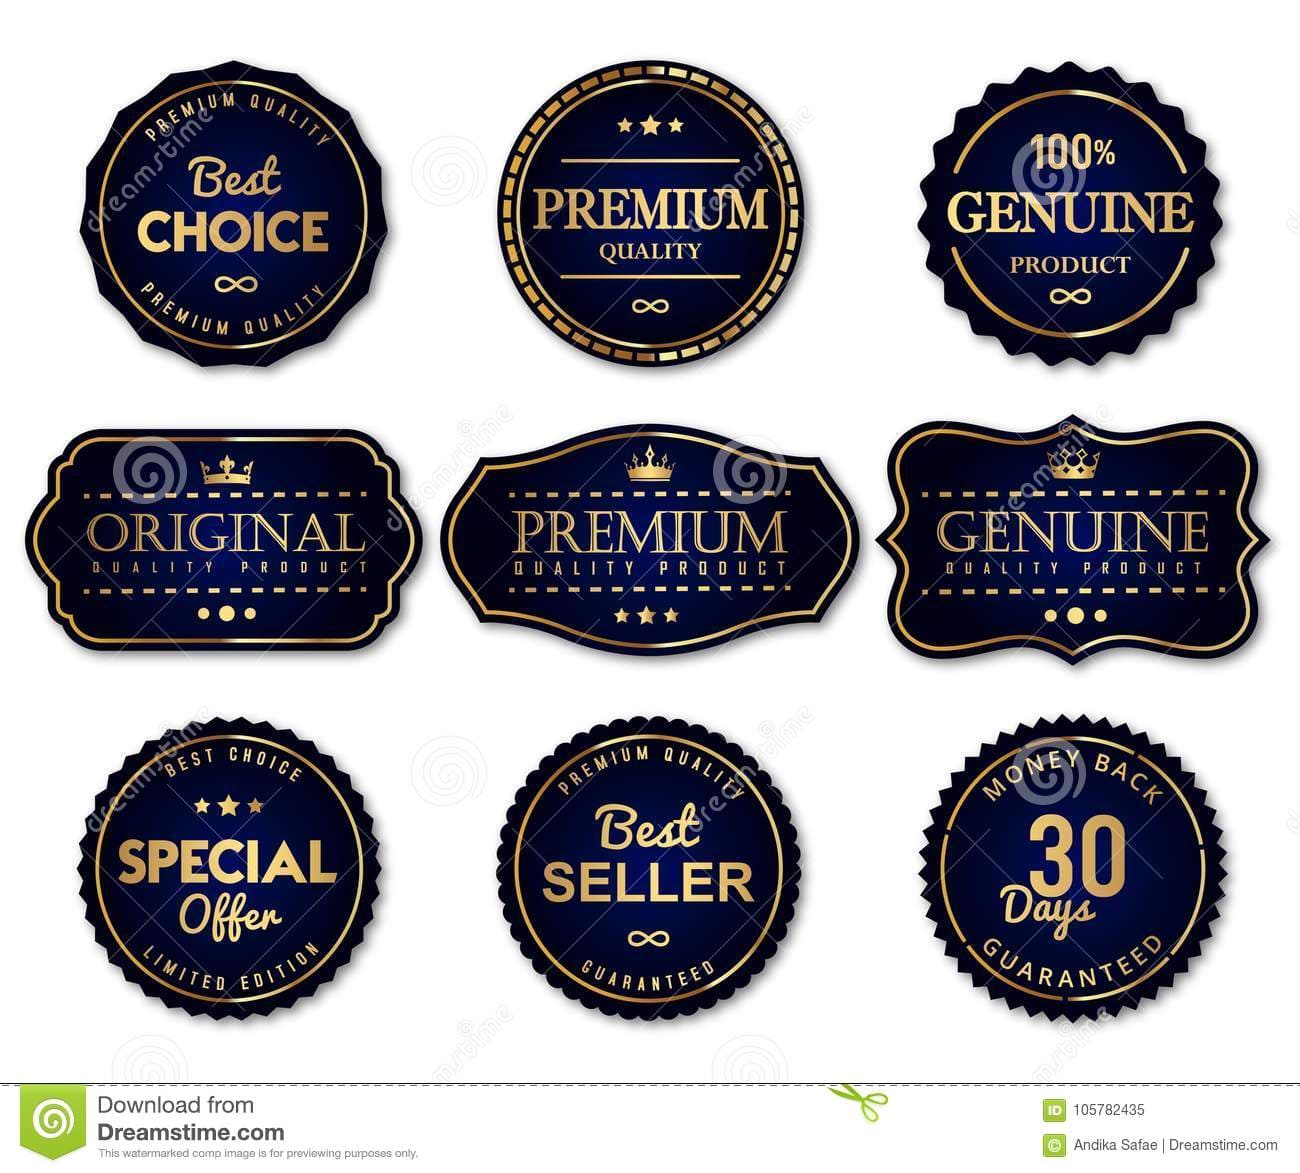 Unusual Metallic Labels - Attract Attention of Your Customers